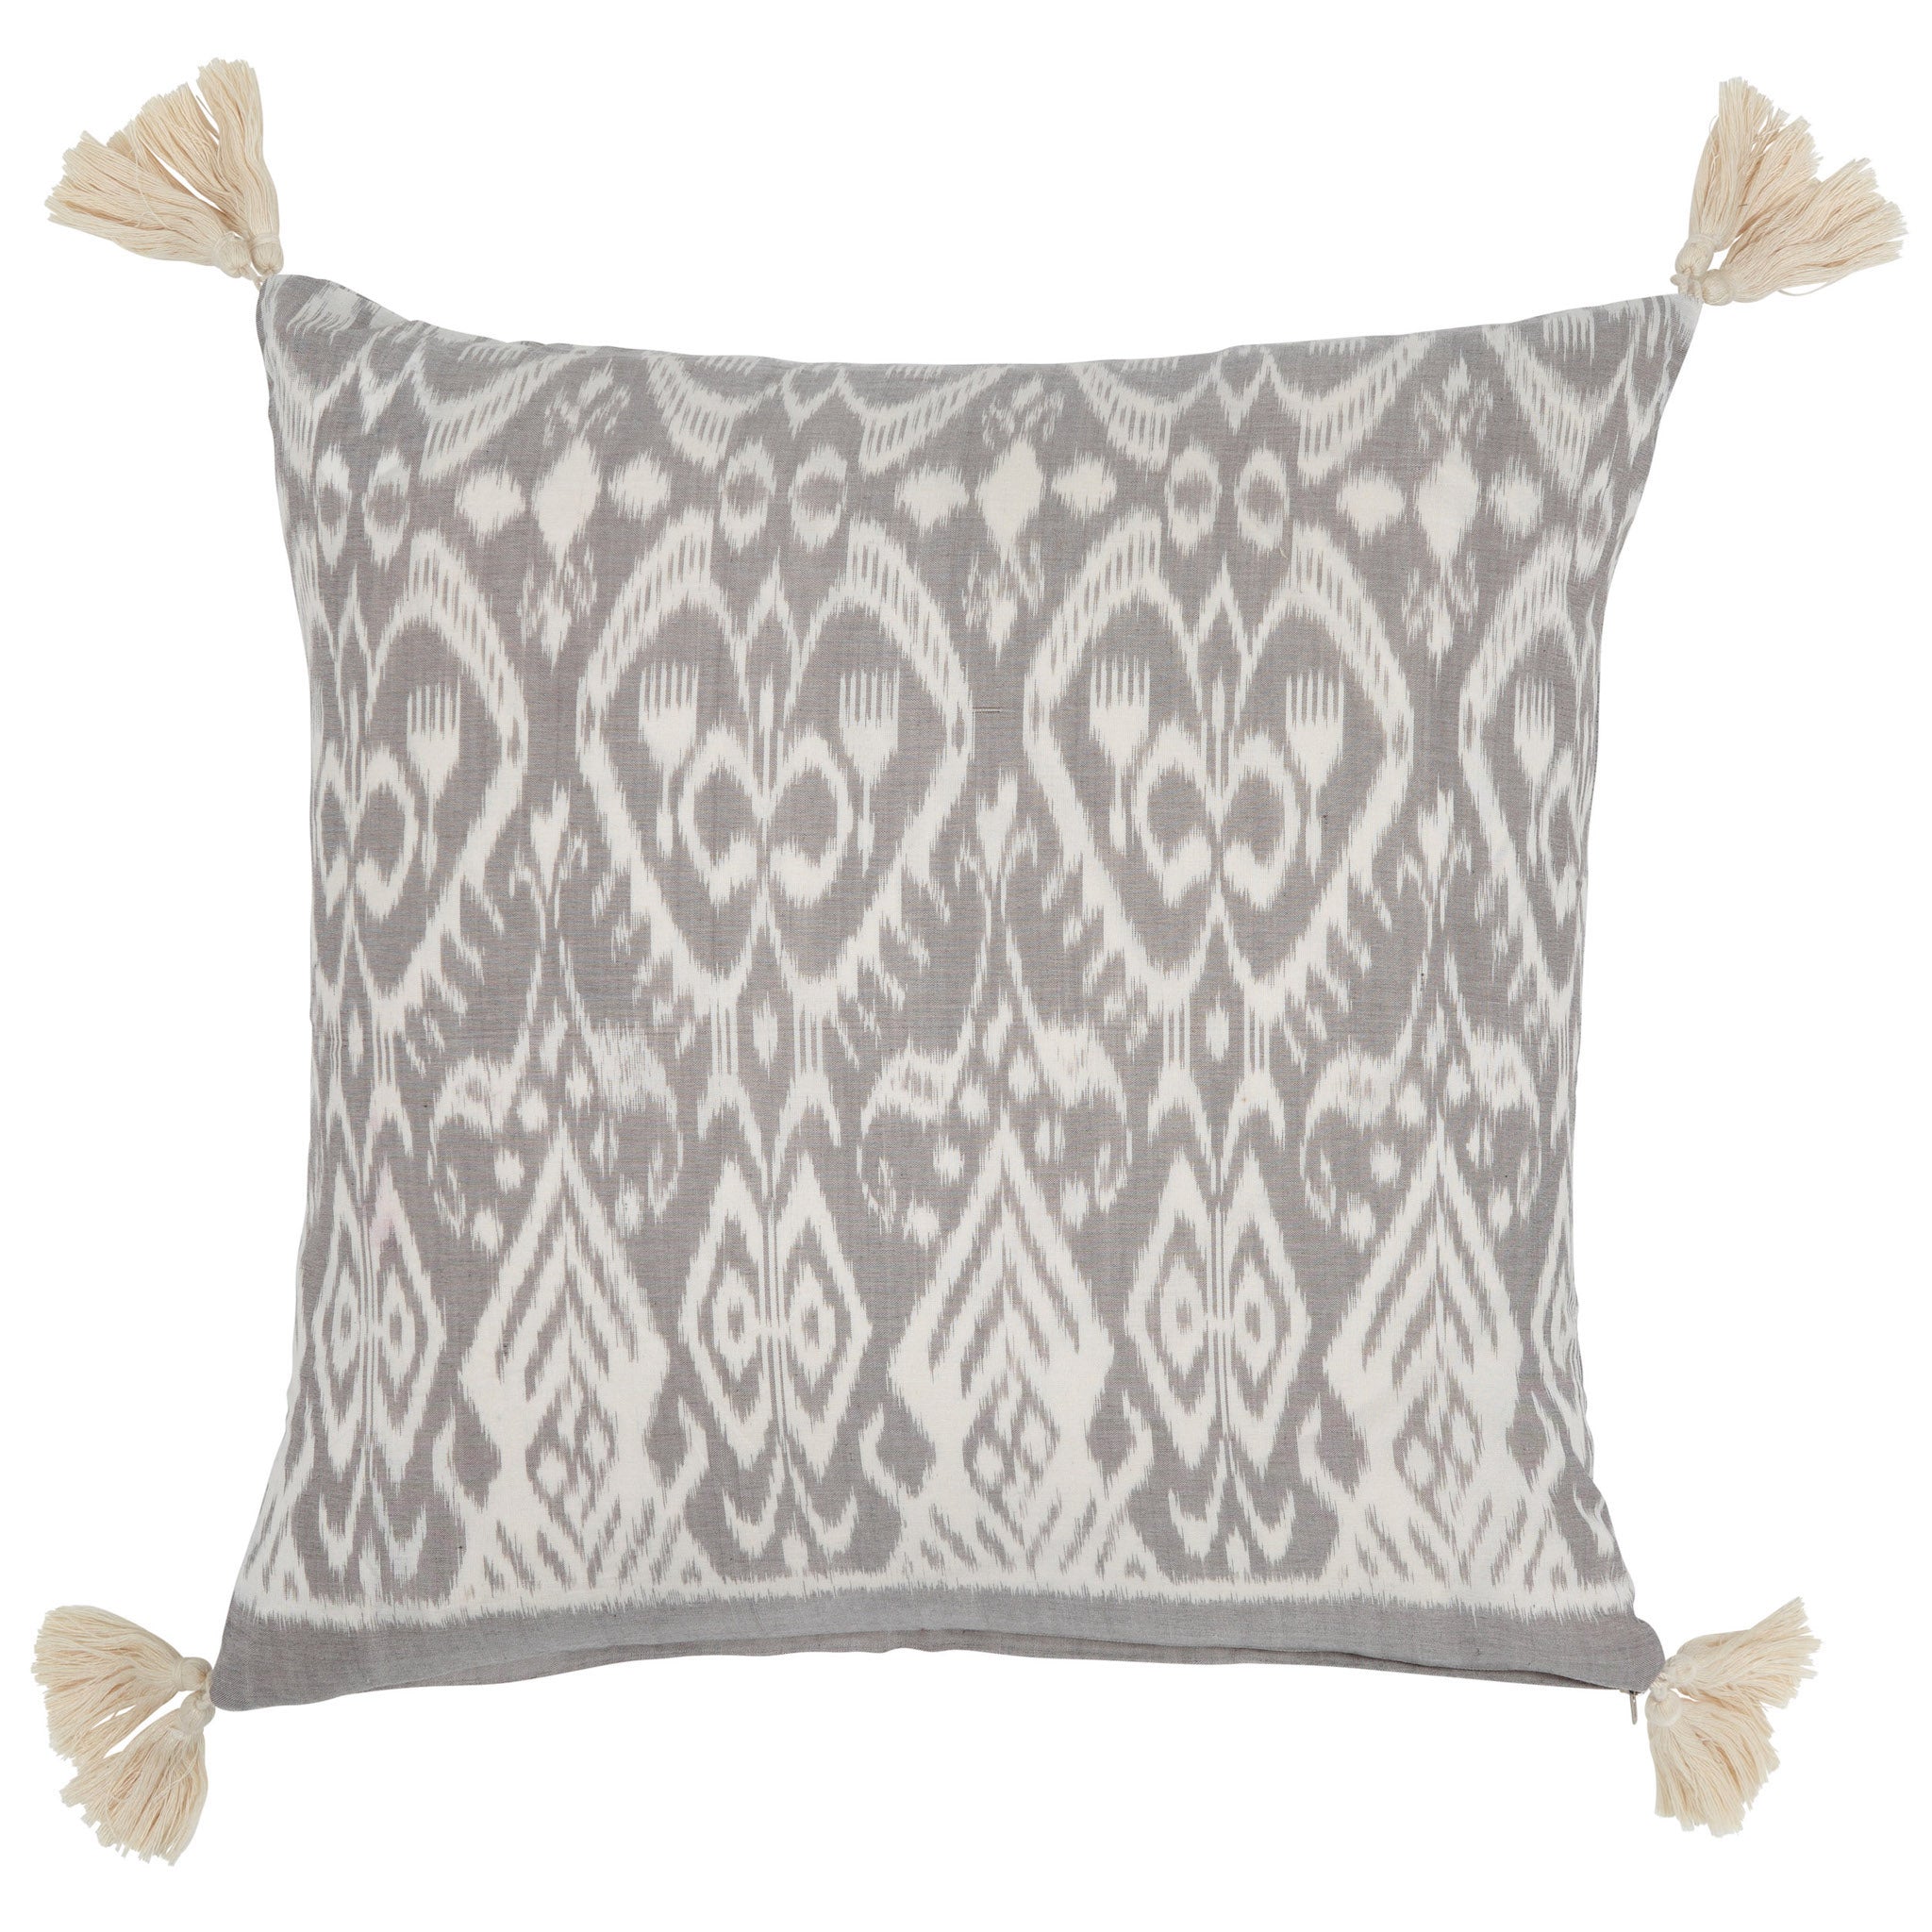 Grey and White Cotton Ikat Square Scatter Cushion with Tassels from Bali, Indonesia - FRONT